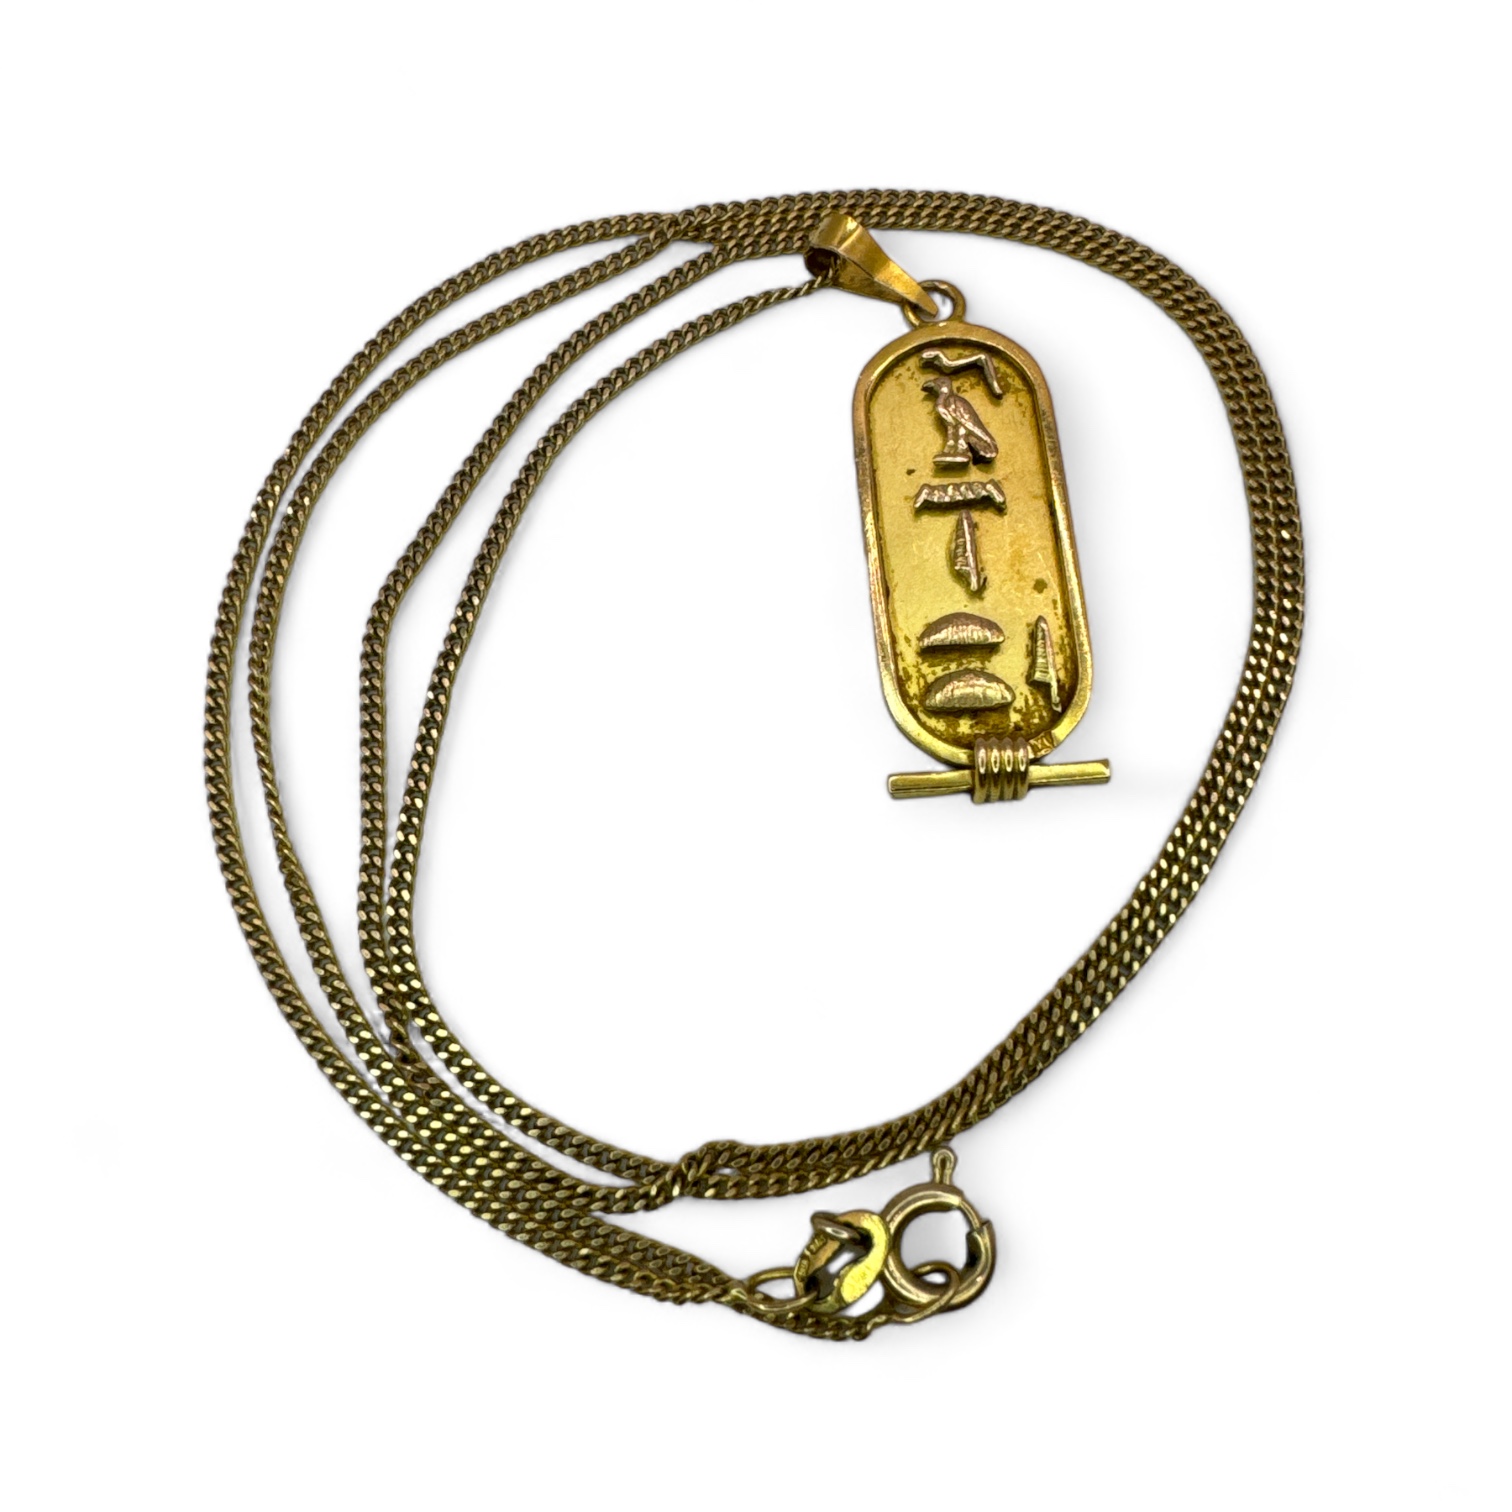 An Egyptian Cartouche panel, testing as 18k gold, reading "Janette" in hieroglyphs. On a chain